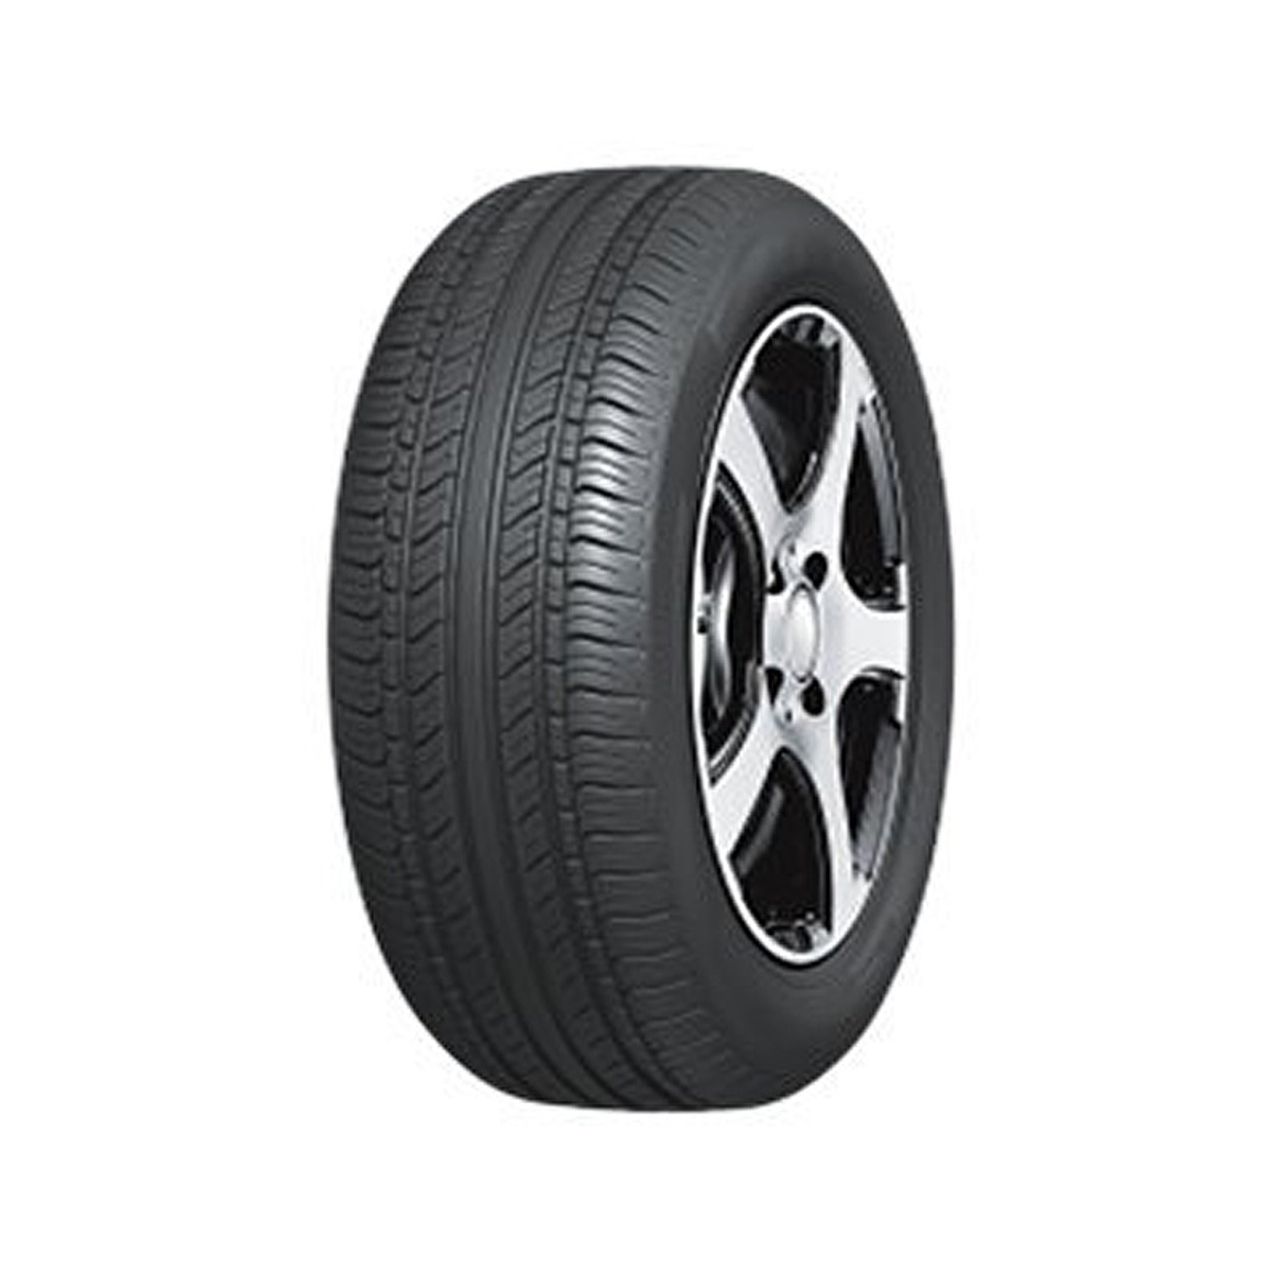 ROVELO RHP-780P 185/65R15 92T BSW